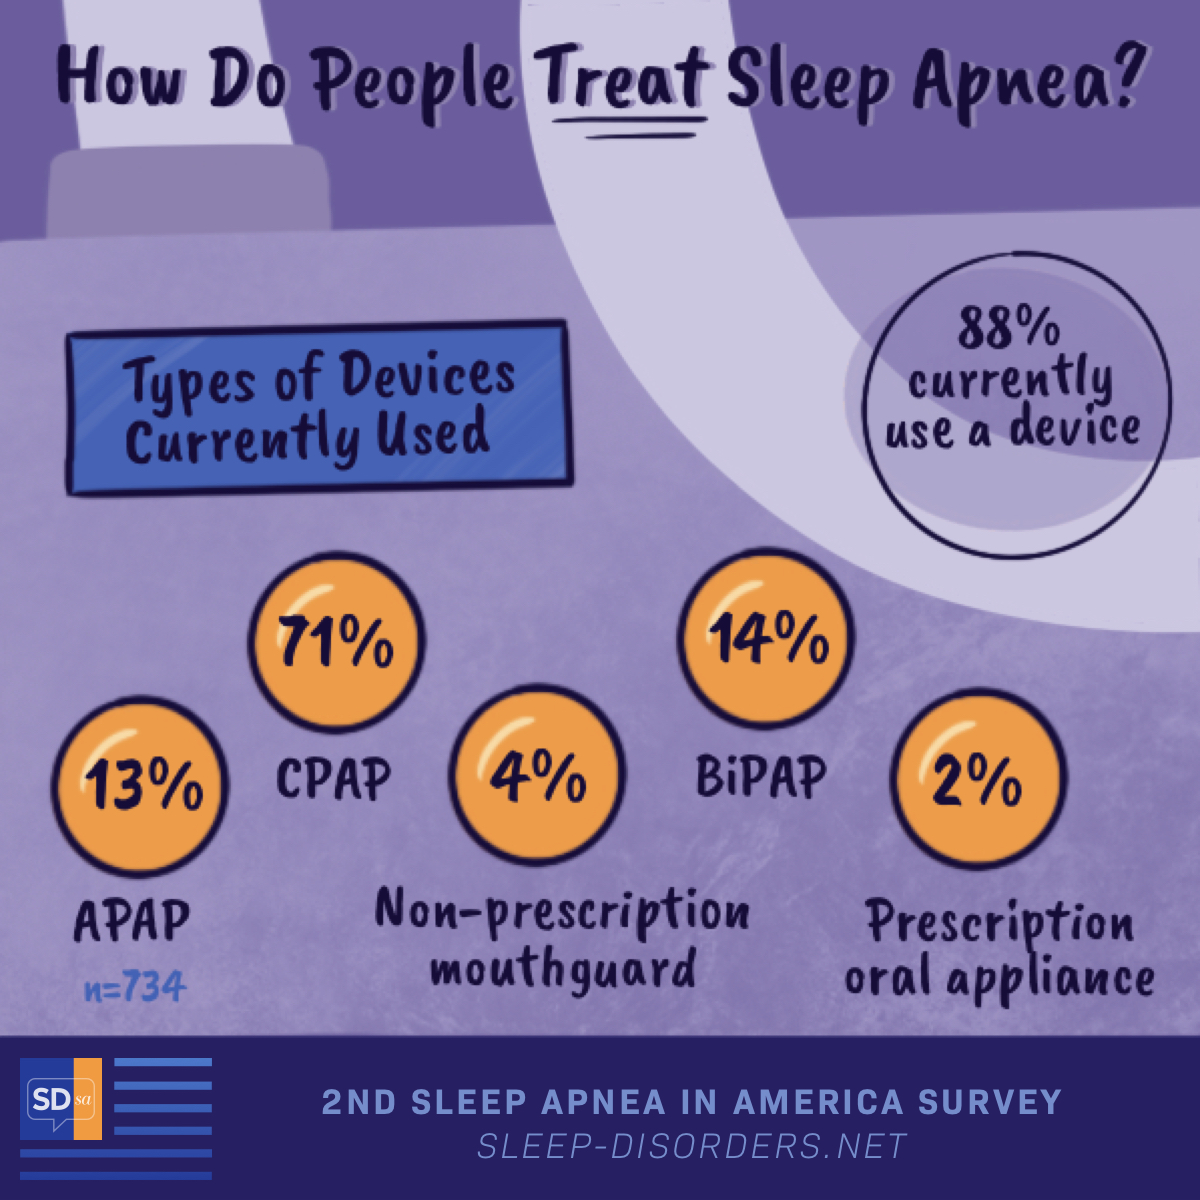 Types of devices used to treat sleep apnea include CPAP, BiPAP, APAP, non-prescription mouthguards, and prescription oral appliances.